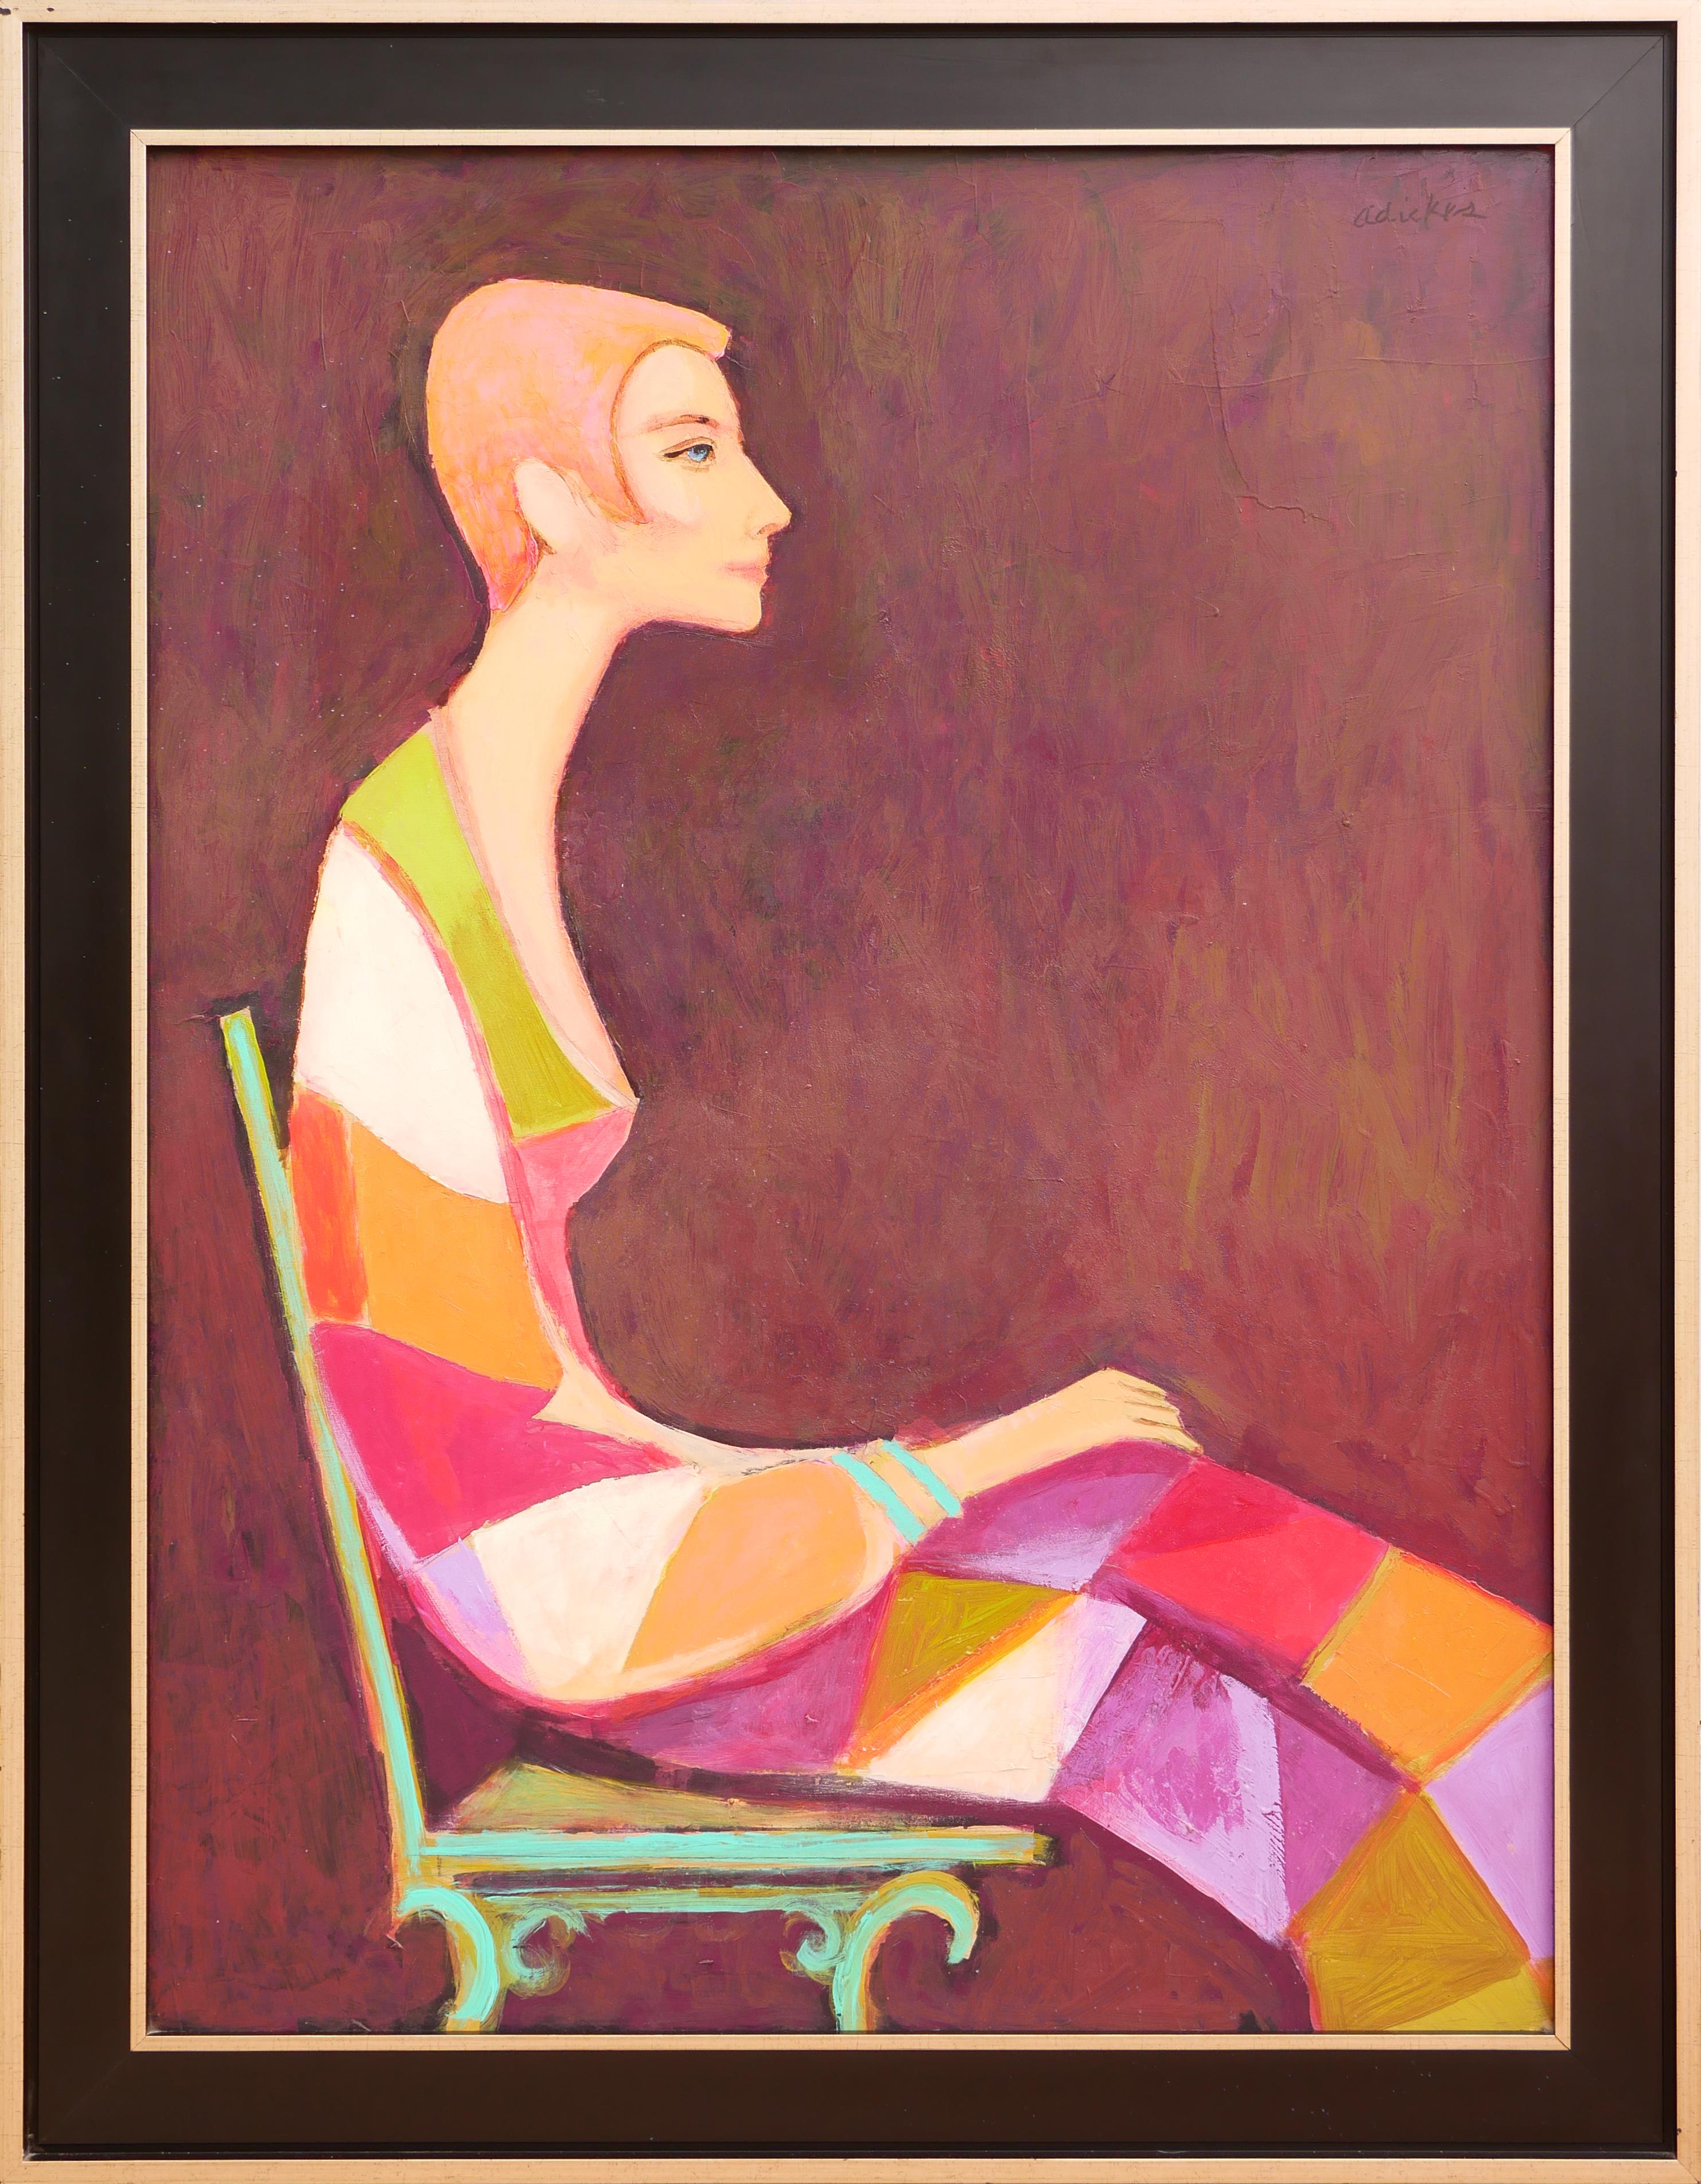 David Adickes Figurative Painting - "My New Dress" Modern Abstract Colorful Figurative Female Portrait Painting 